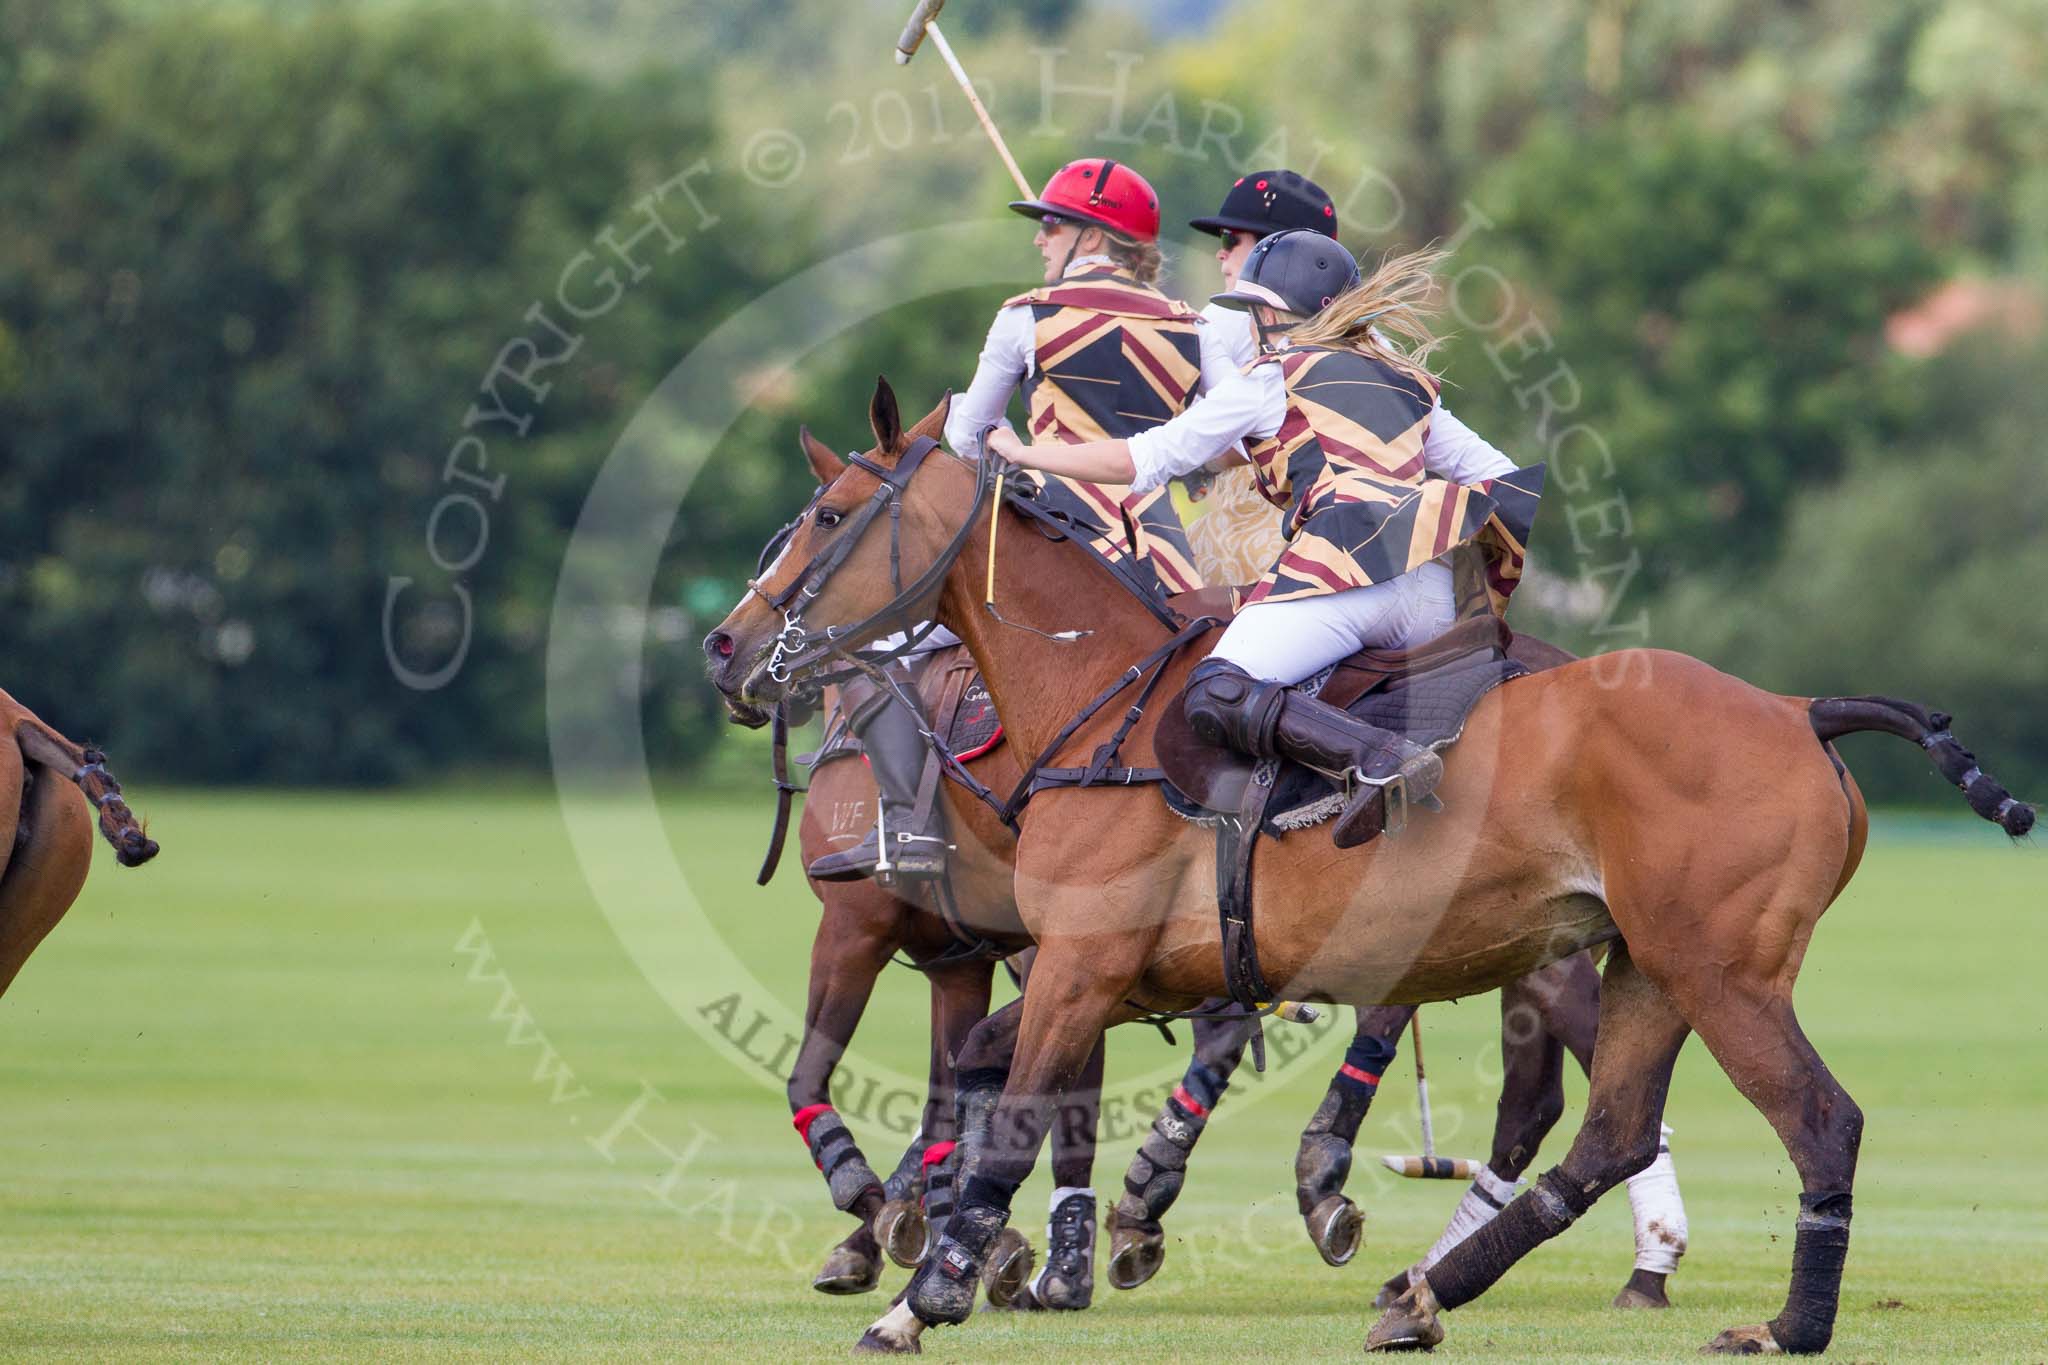 7th Heritage Polo Cup finals: Charlie Howel on the ball..
Hurtwood Park Polo Club,
Ewhurst Green,
Surrey,
United Kingdom,
on 05 August 2012 at 15:15, image #138